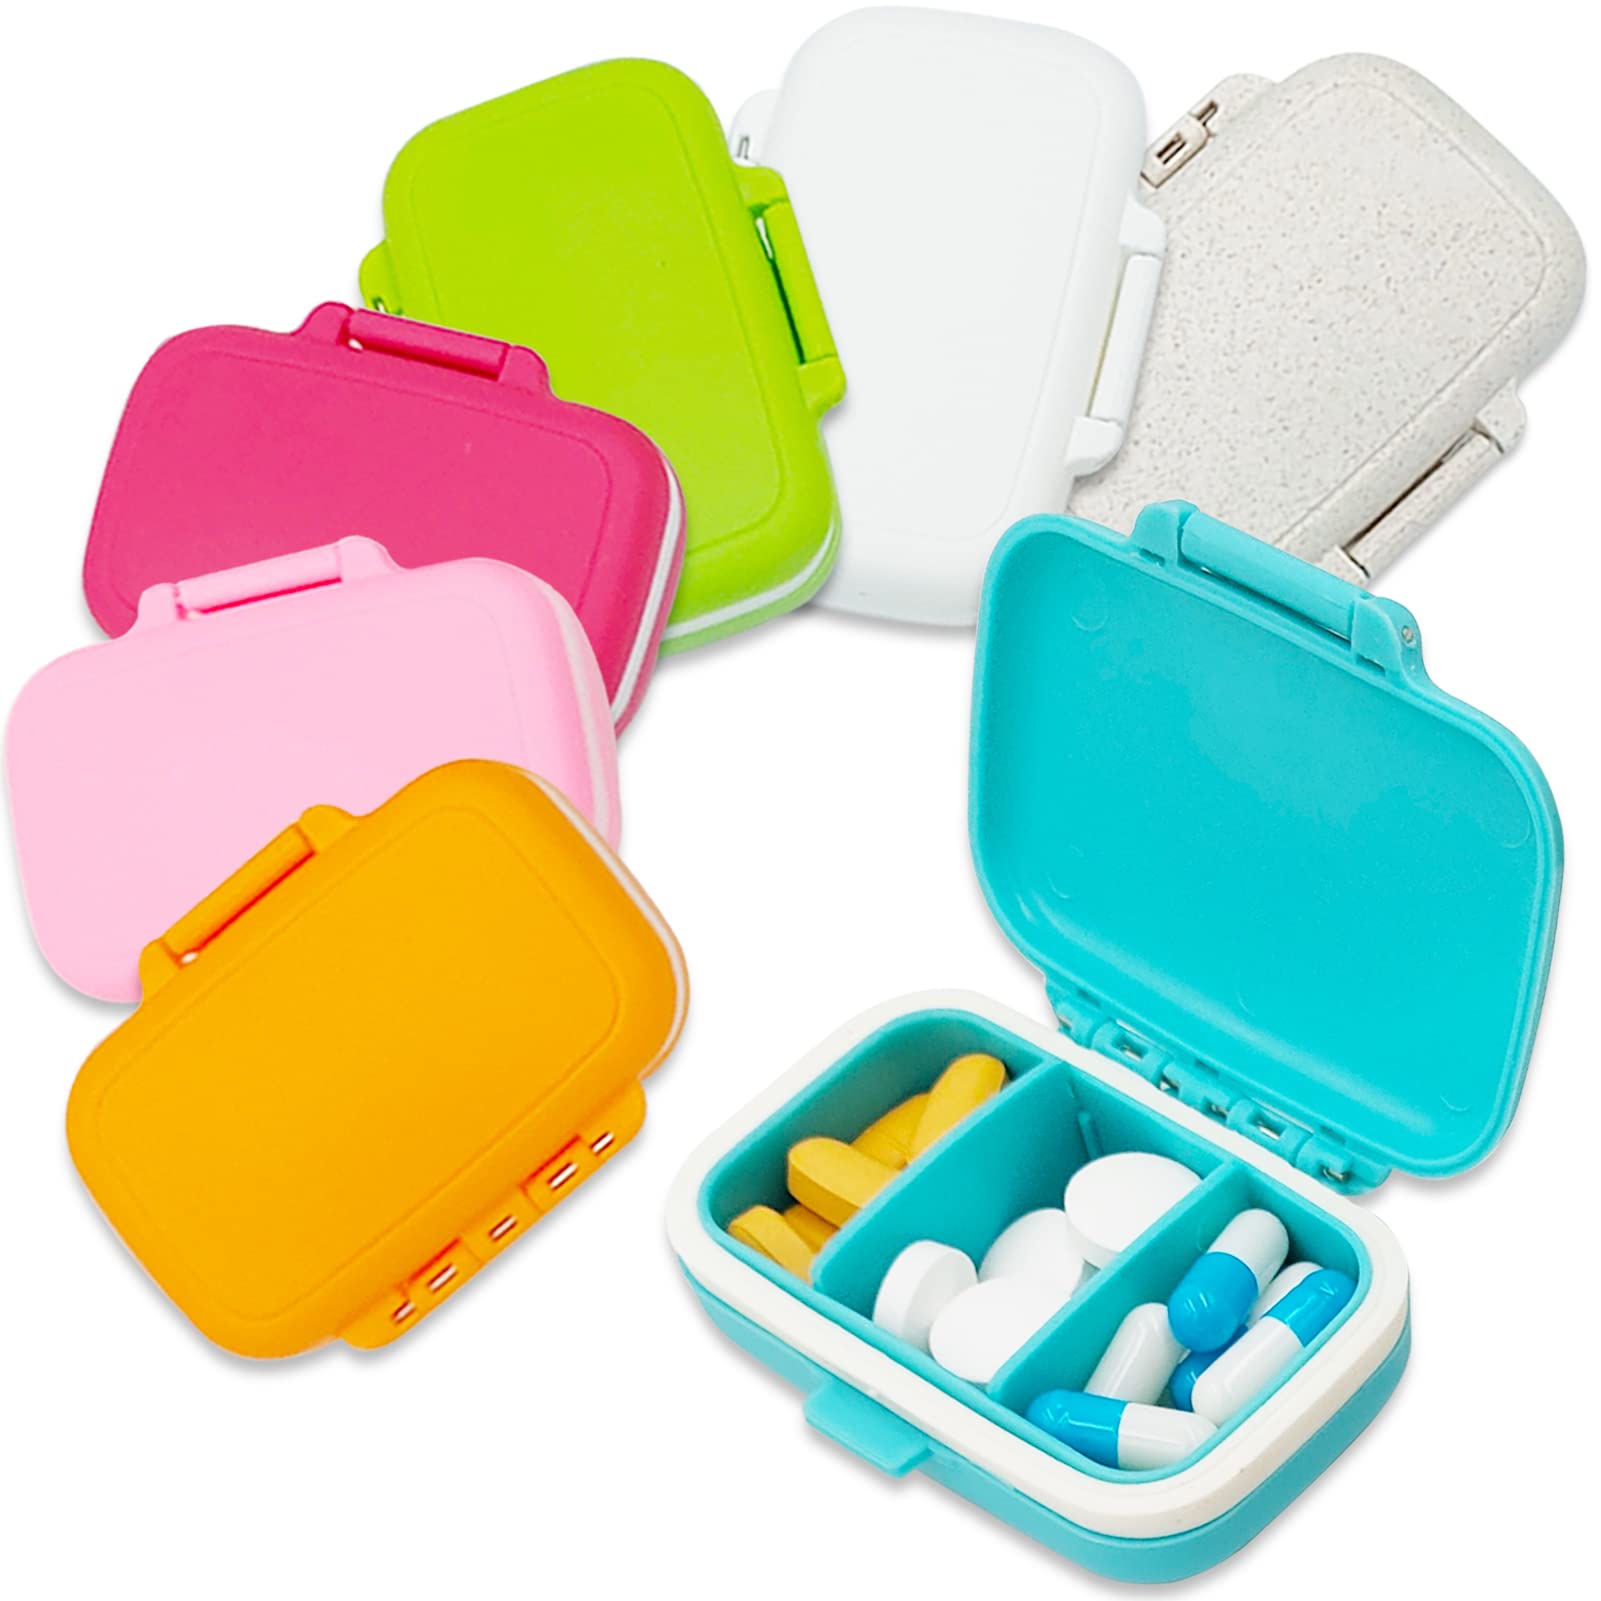 3 Pack - Open Lid Round Pill Box Organizer Pocket Small case Holder,Daily  containers. Medicine Holder, Ideal for Medication, Vitamin, Supplement